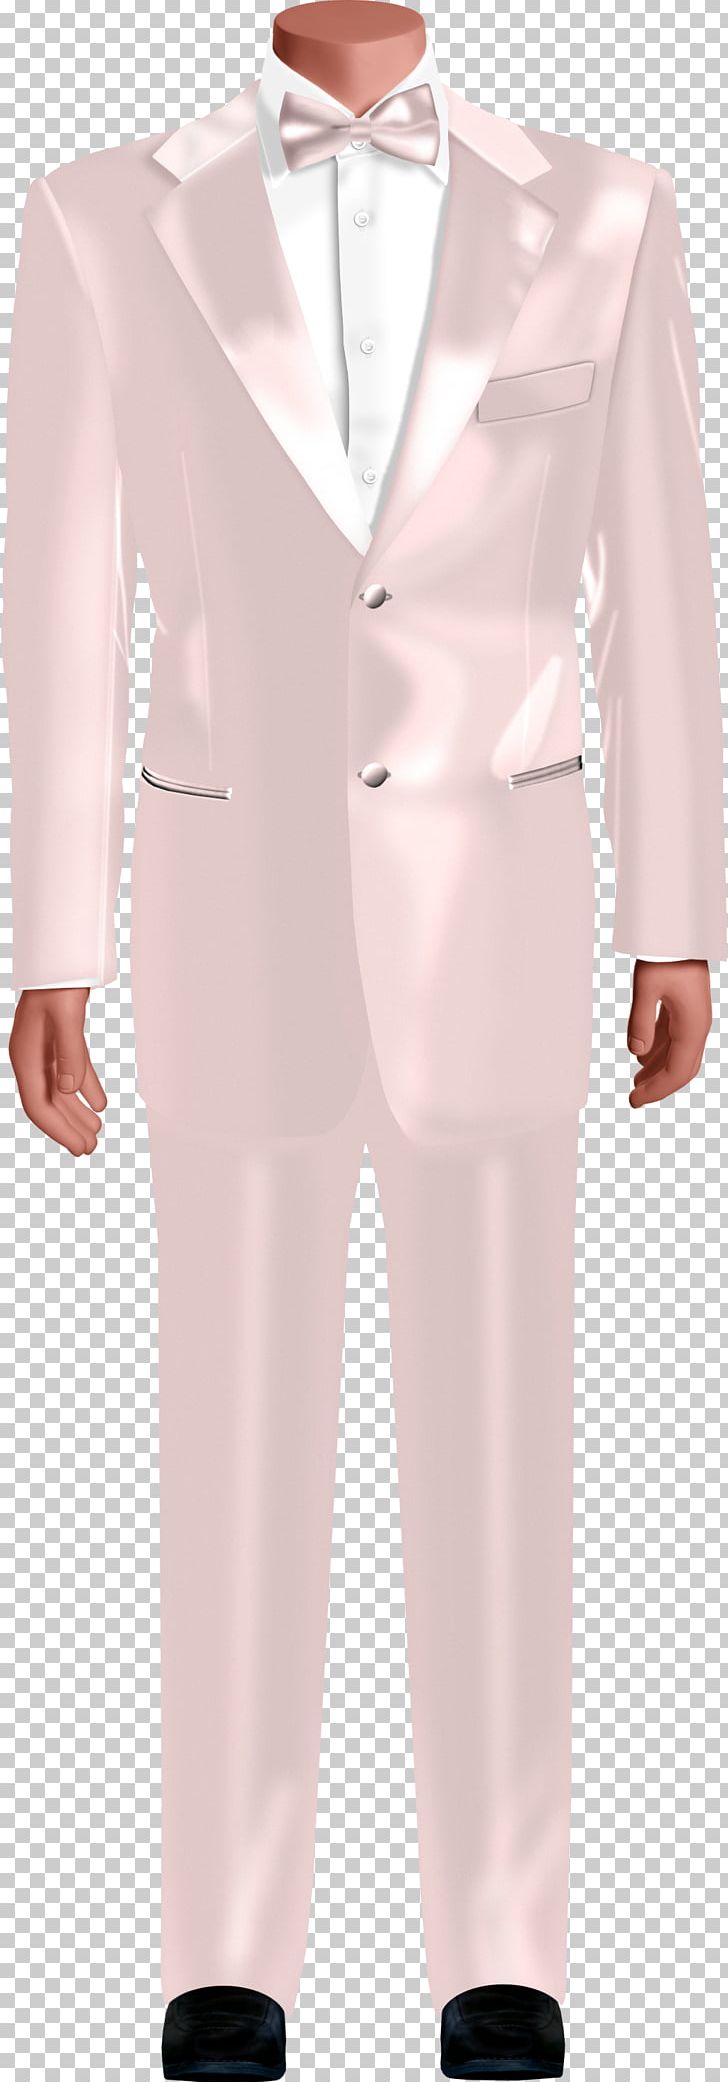 Tuxedo Suit Pajamas Formal Wear PNG, Clipart, Black Suit, Clothing, Costume, Download, Drawing Free PNG Download